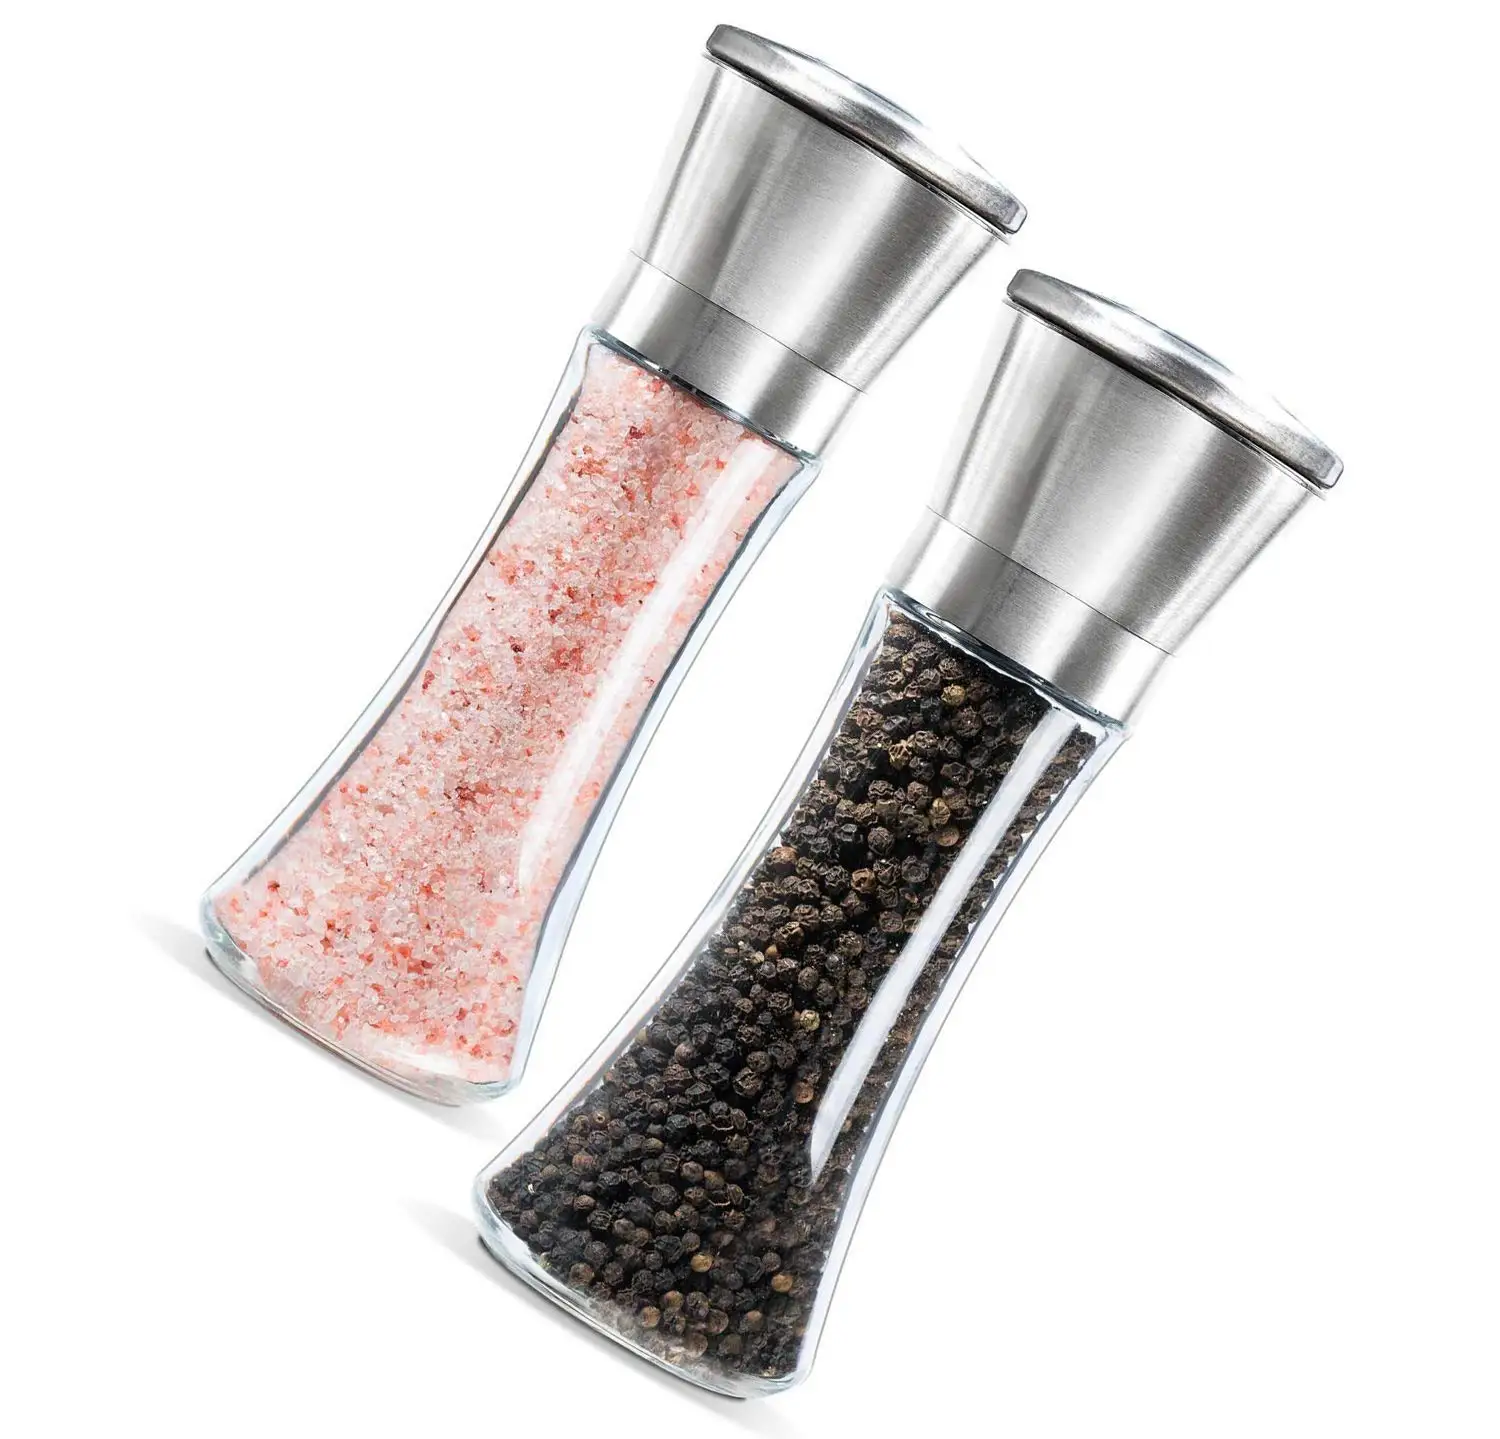 5 Grade Adjustable Ceramic Rotor- Salt and Pepper Shakers by Levav Copper 6 Oz Glass Tall Body Premium Salt and Pepper Grinder Set of 2- Brushed Pepper Mill and Salt Mill